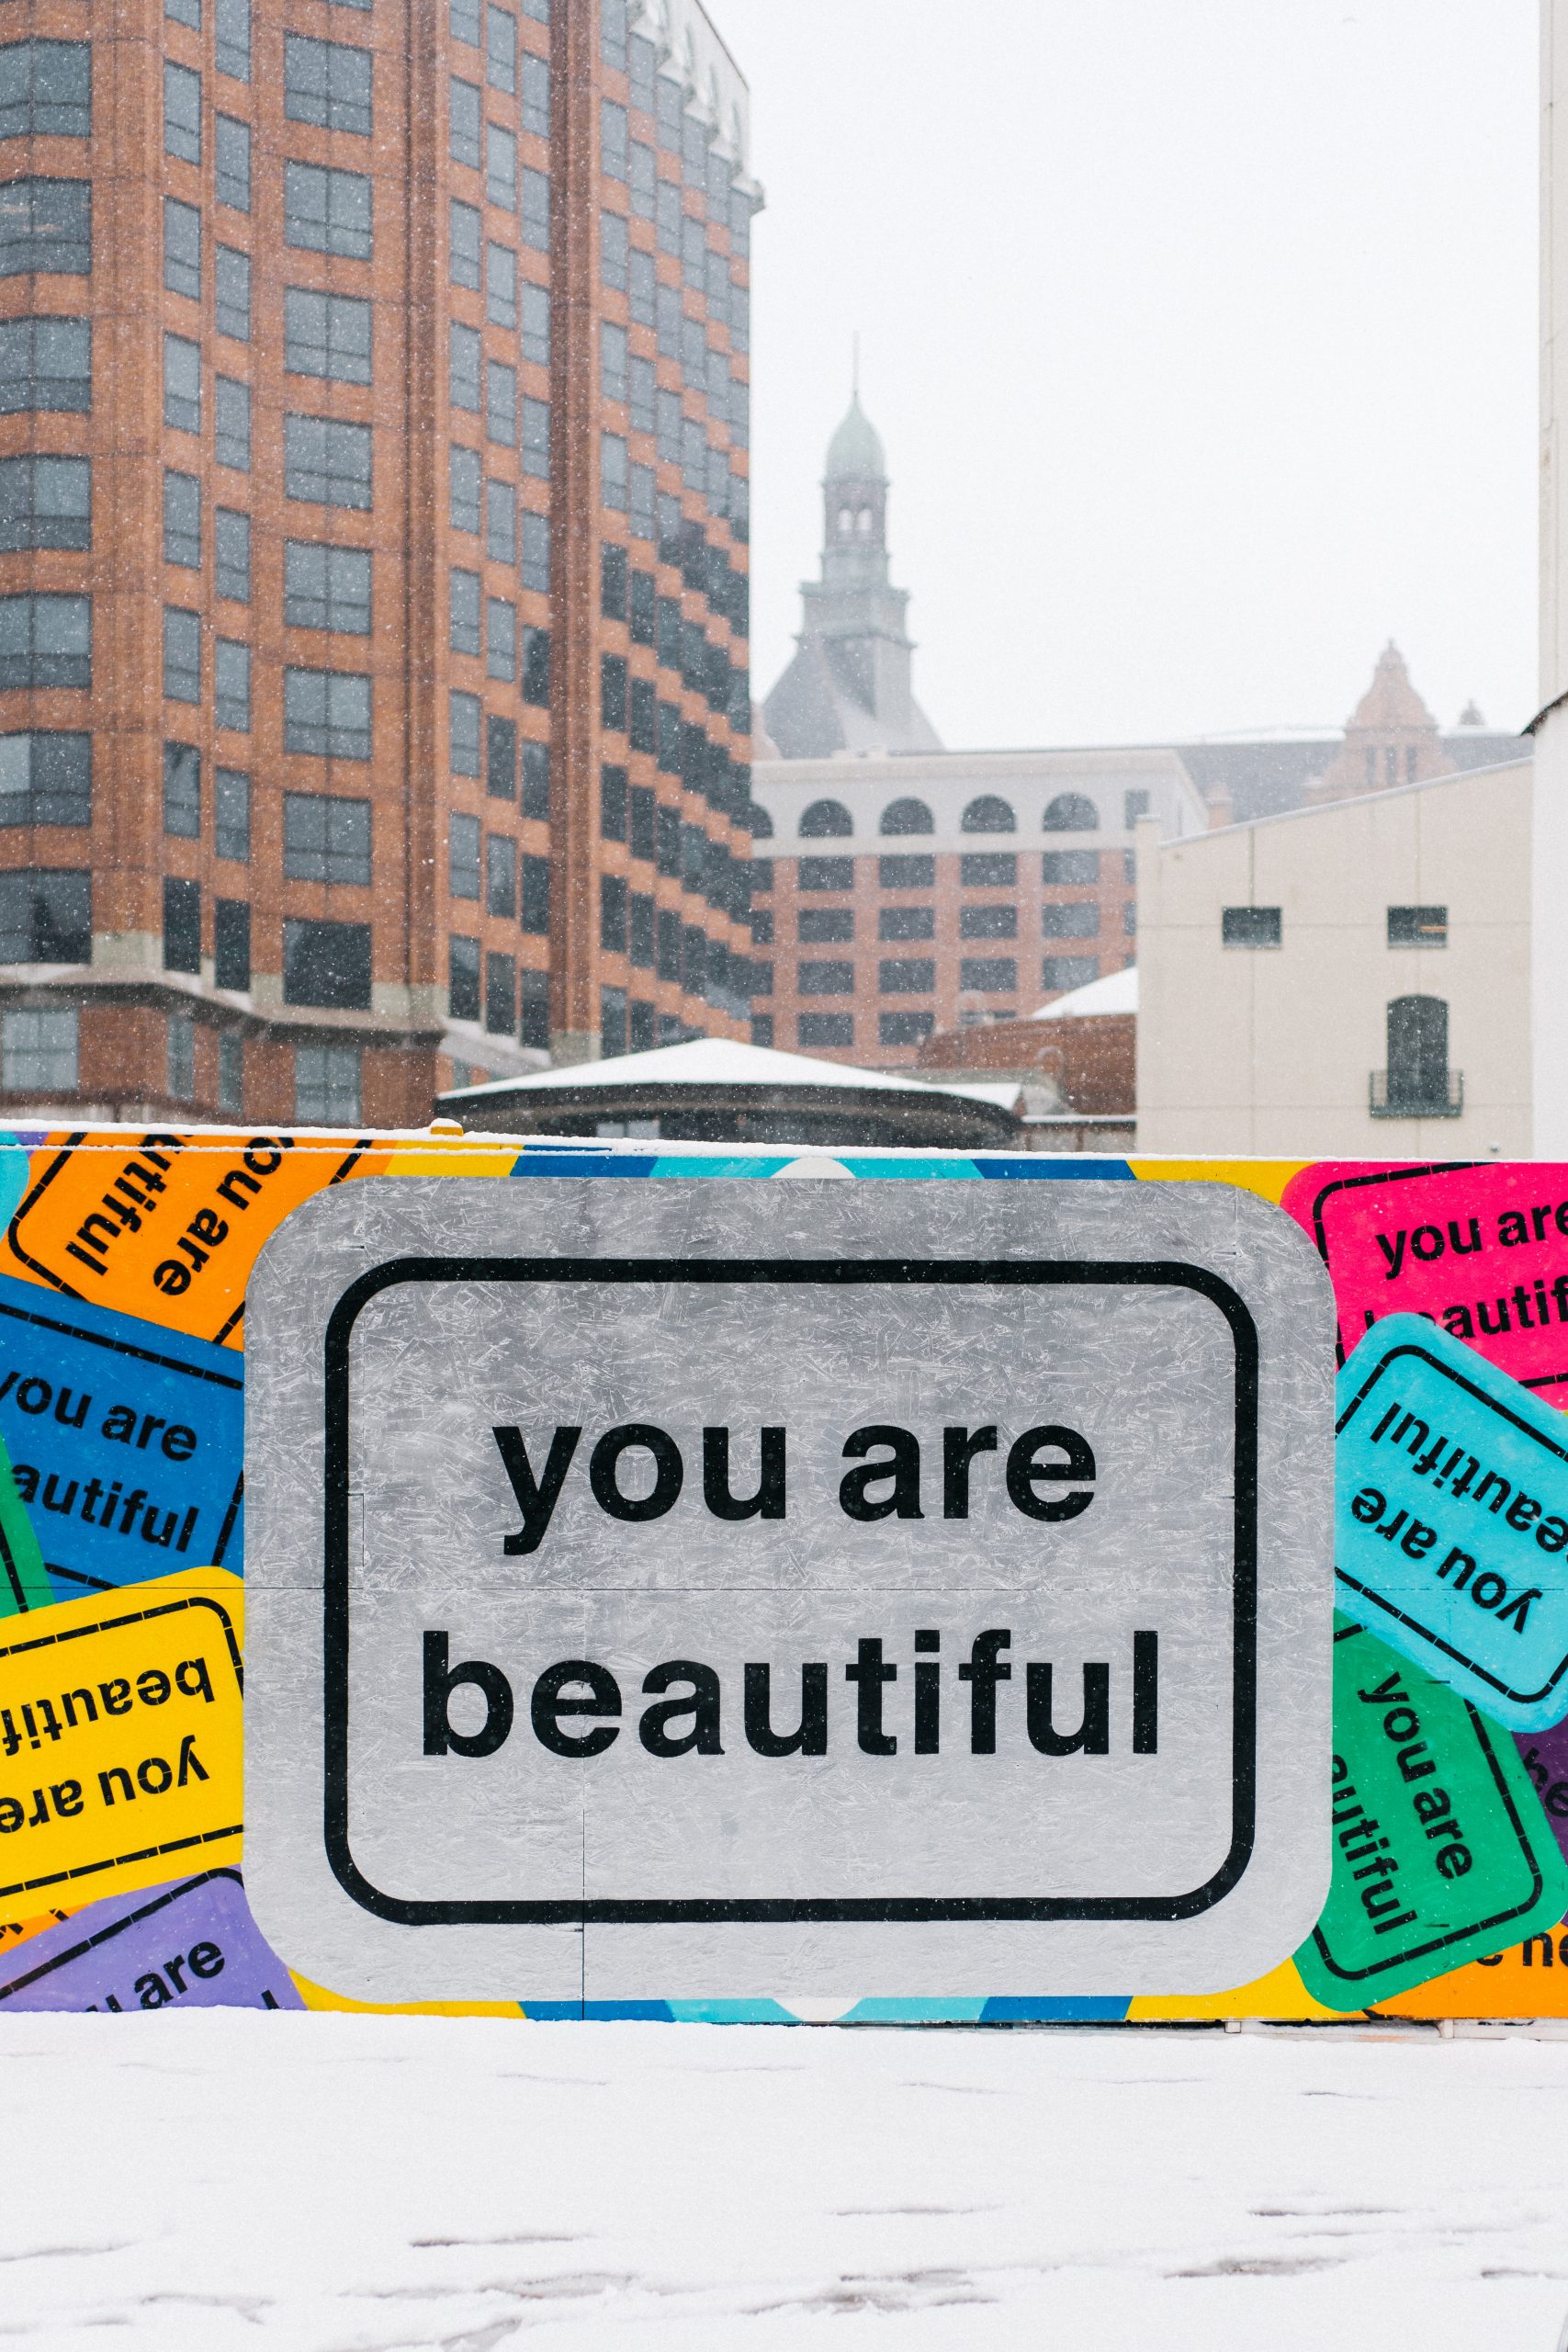 Urban wall displaying multiple large stickers that read "You are beautiful" in Milwaukee, WI